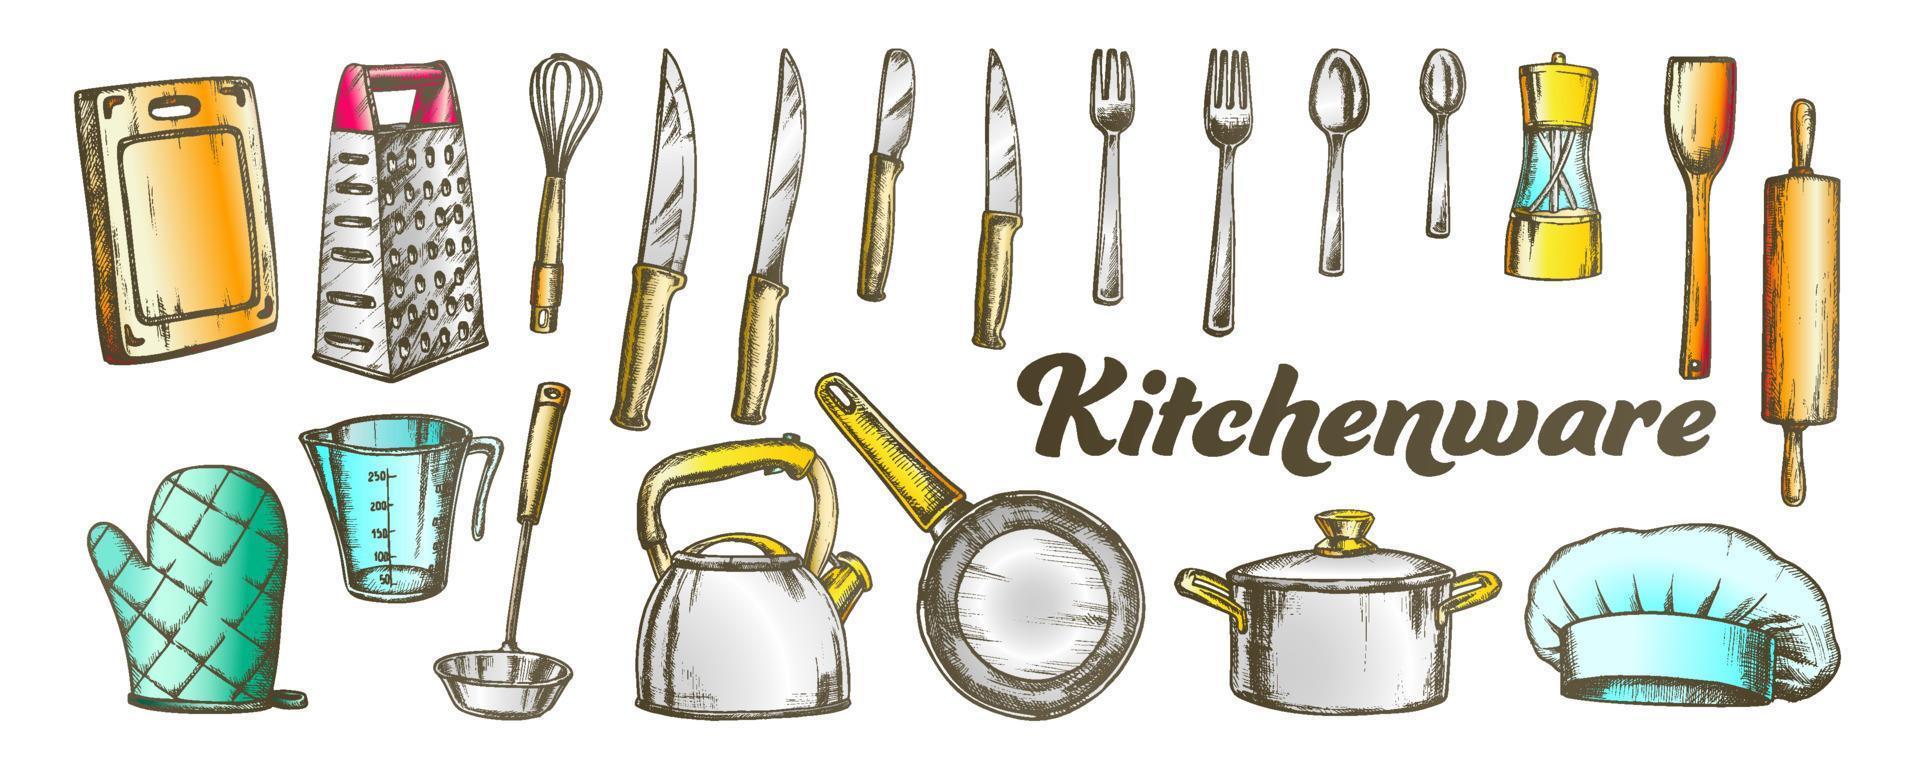 Kitchenware Utensils Collection Color Set Vector